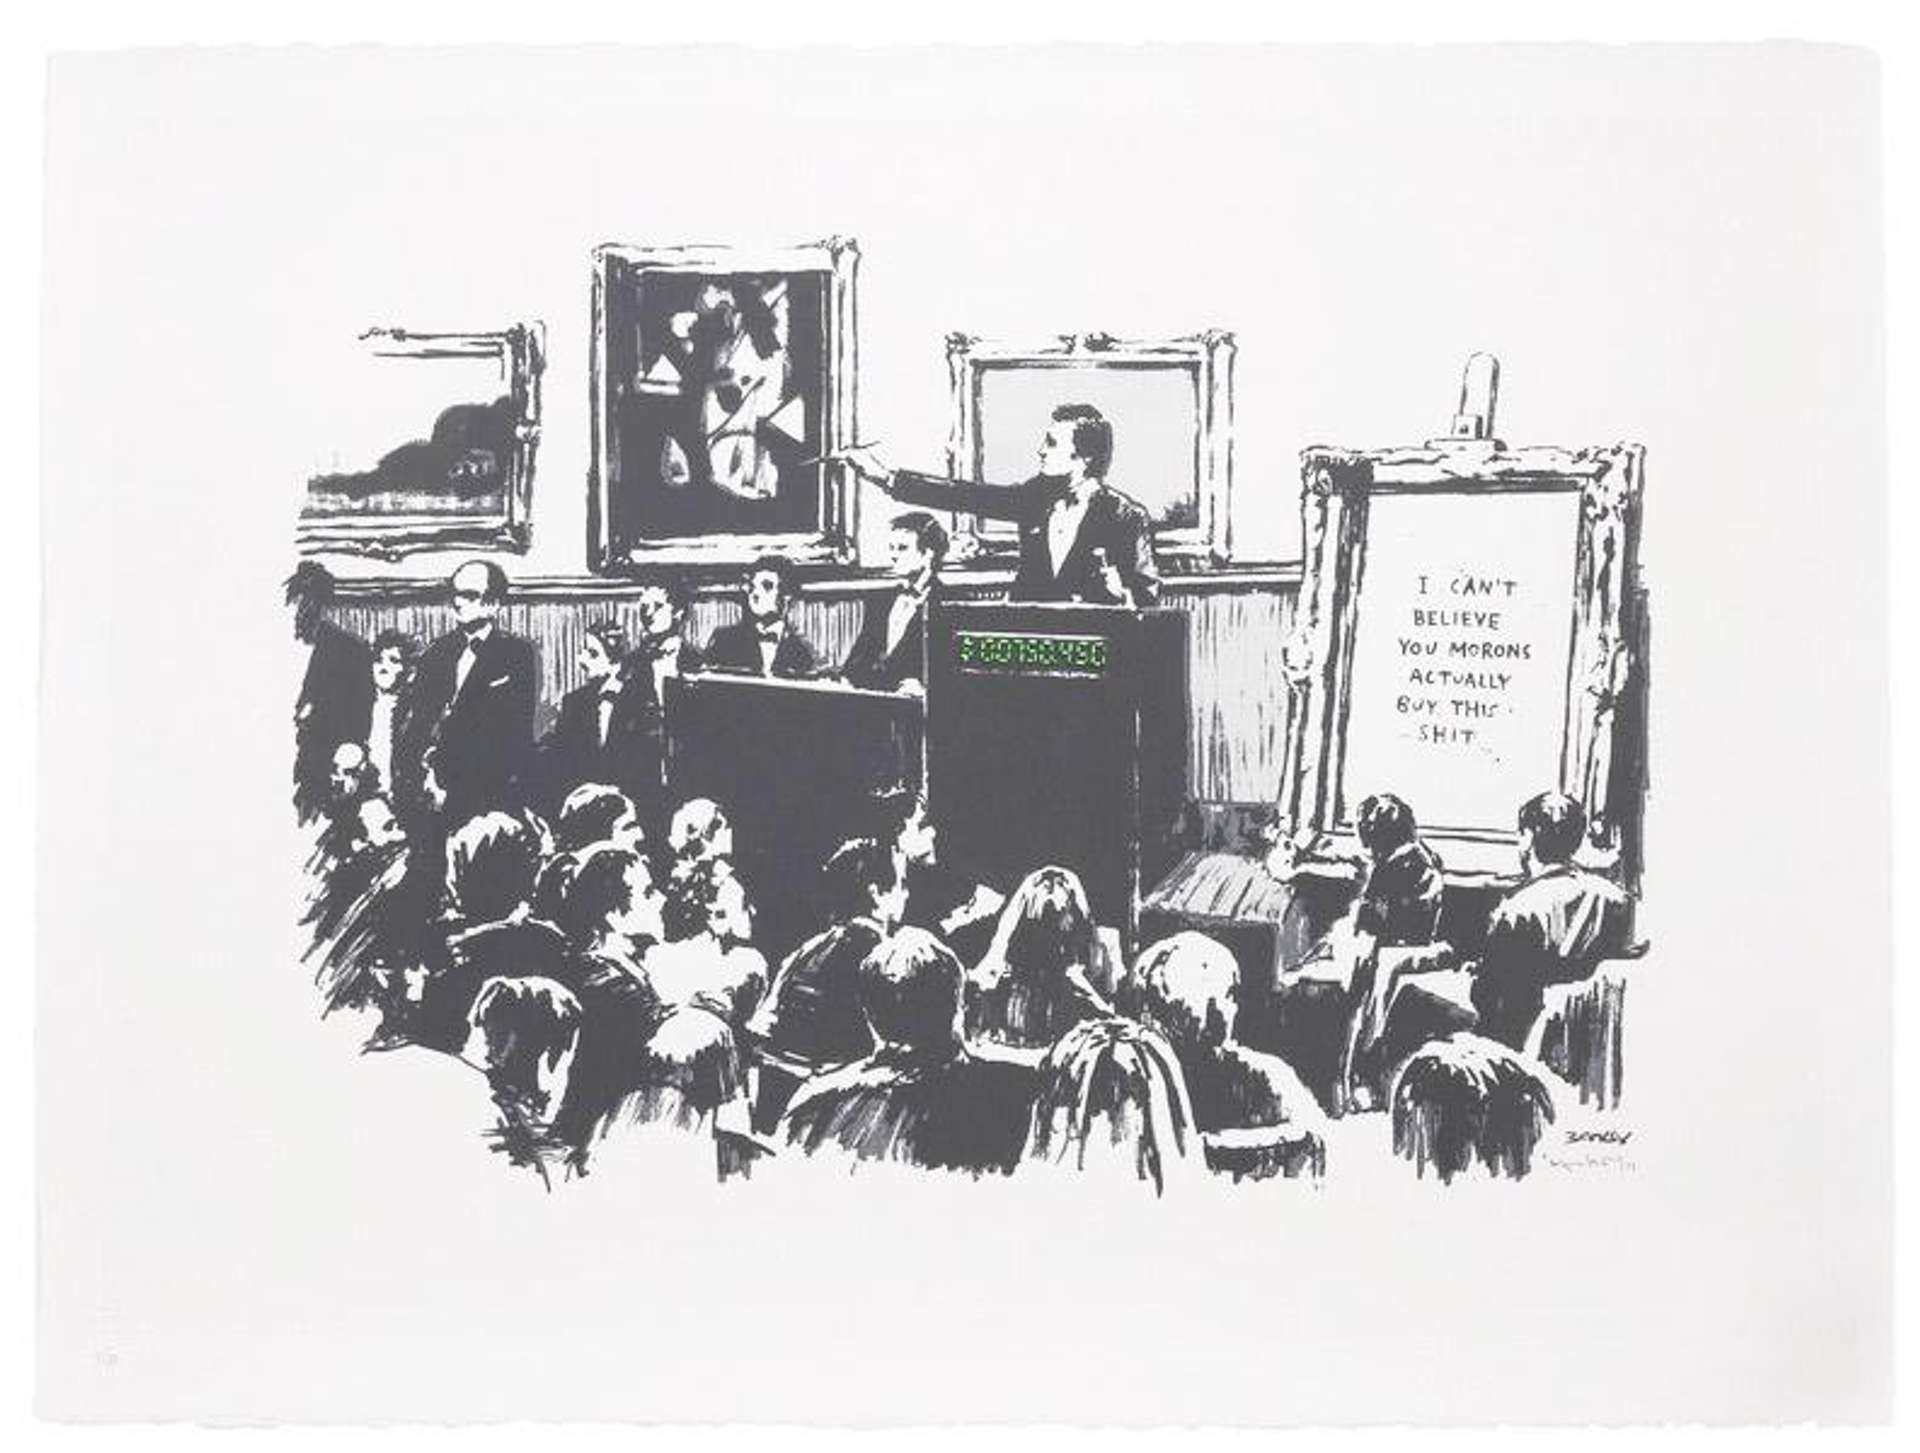 A screeprint by Banksy depicting an auction house full of bidders, with an artwork to the right of the composition reading: “I CAN'T BELIEVE YOU MORONS ACTUALLY BUY THIS SHIT”.